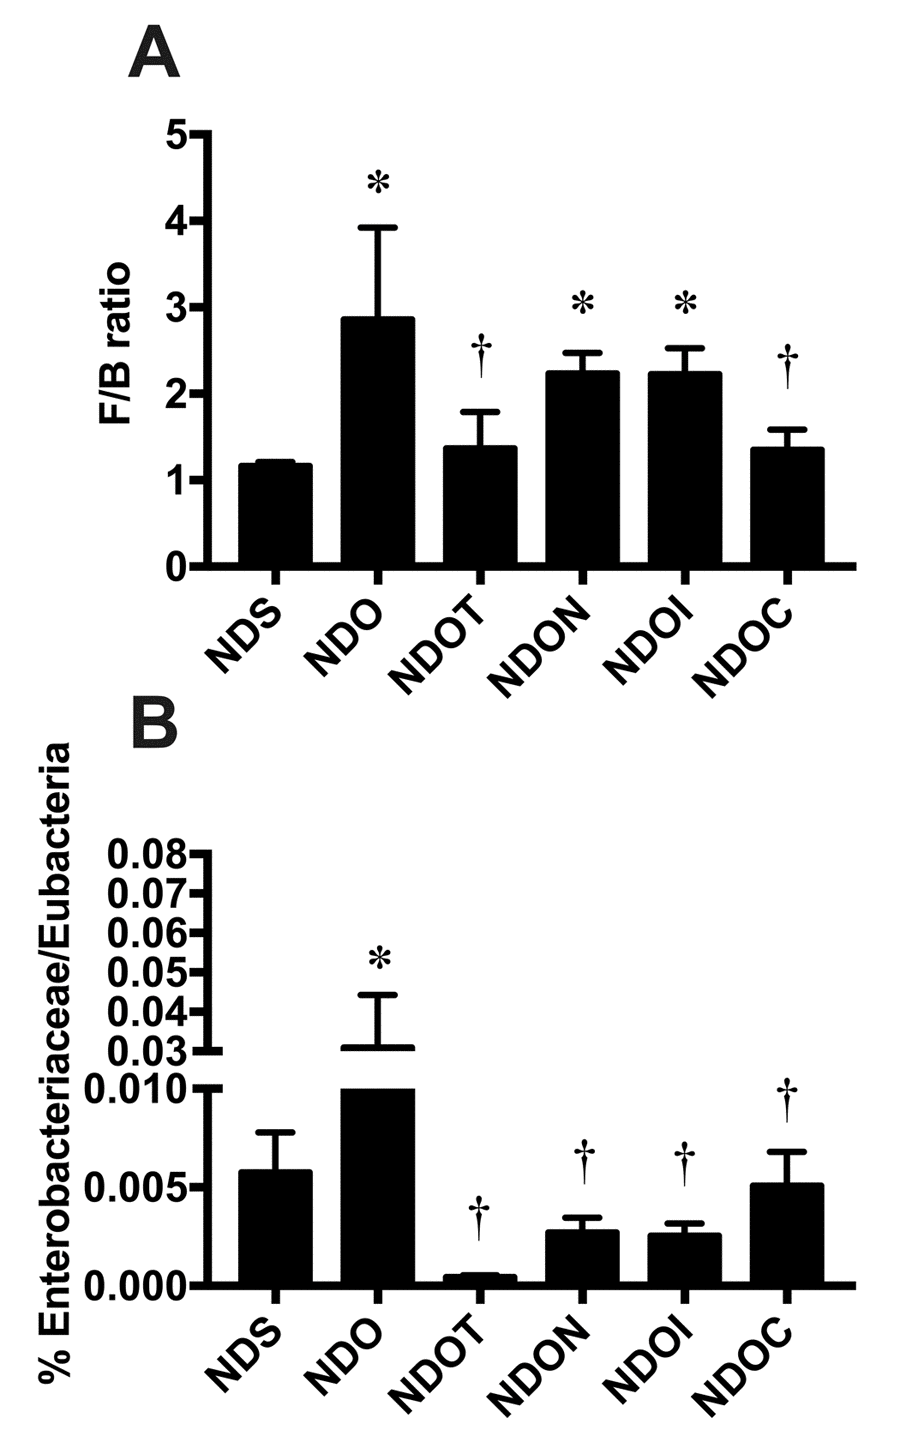 The effects of NAC, inulin and combined therapy on gut dysbiosis in rats with testosterone deprivation. (A) F/B ratio and (B) Enterobacteriaceae were normalized by Eubecteria. NDS: rats with sham operation; NDO: rats with orchiectomy; NDOT: rats with orchiectomy receiving testosterone replacement; NDON: rats with orchiectomy receiving NAC treatment; NDOI: rats with orchiectomy receiving inulin treatment; NDOC: rats with orchiectomy receiving the combined therapy (the combination of NAC and inulin) (N=6 in each group) *p